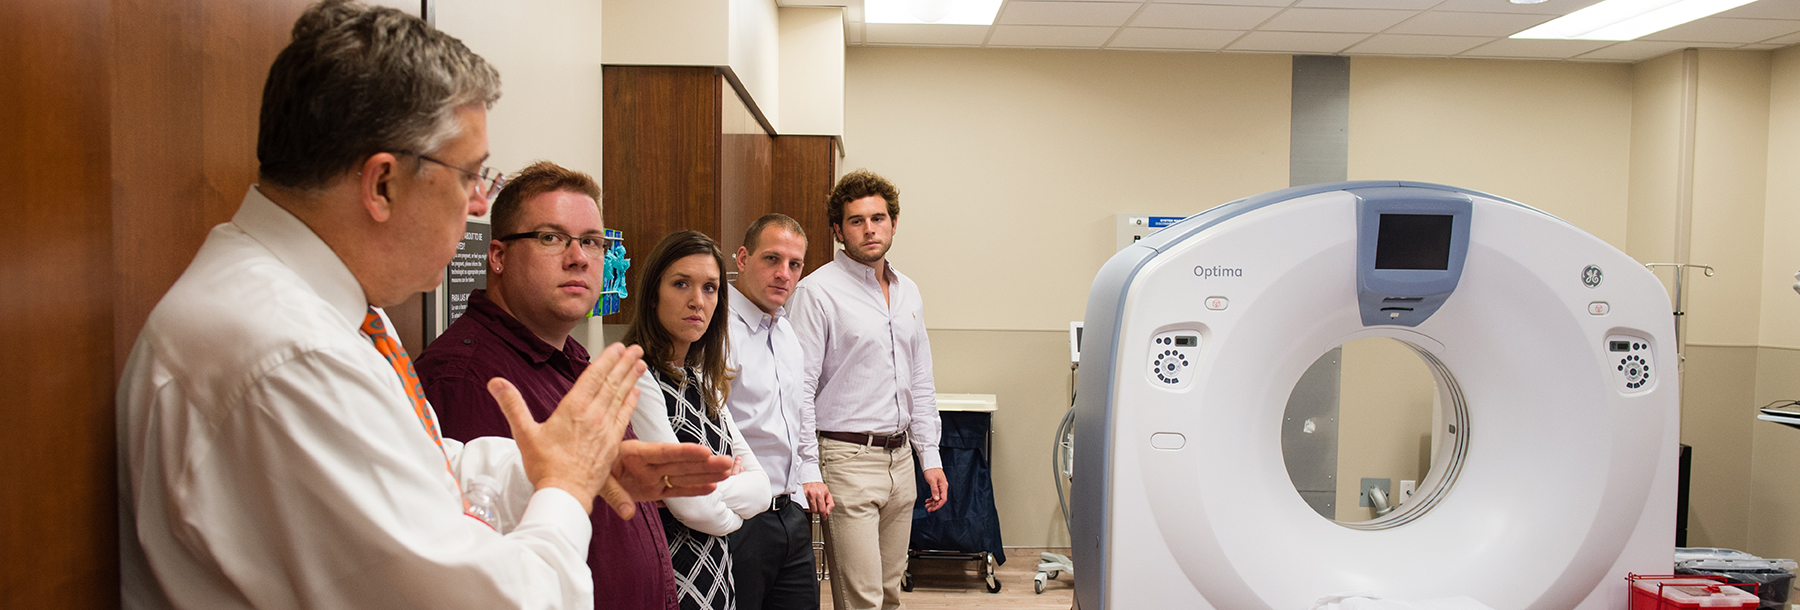 Section Image: Students with teacher in CT scan room 